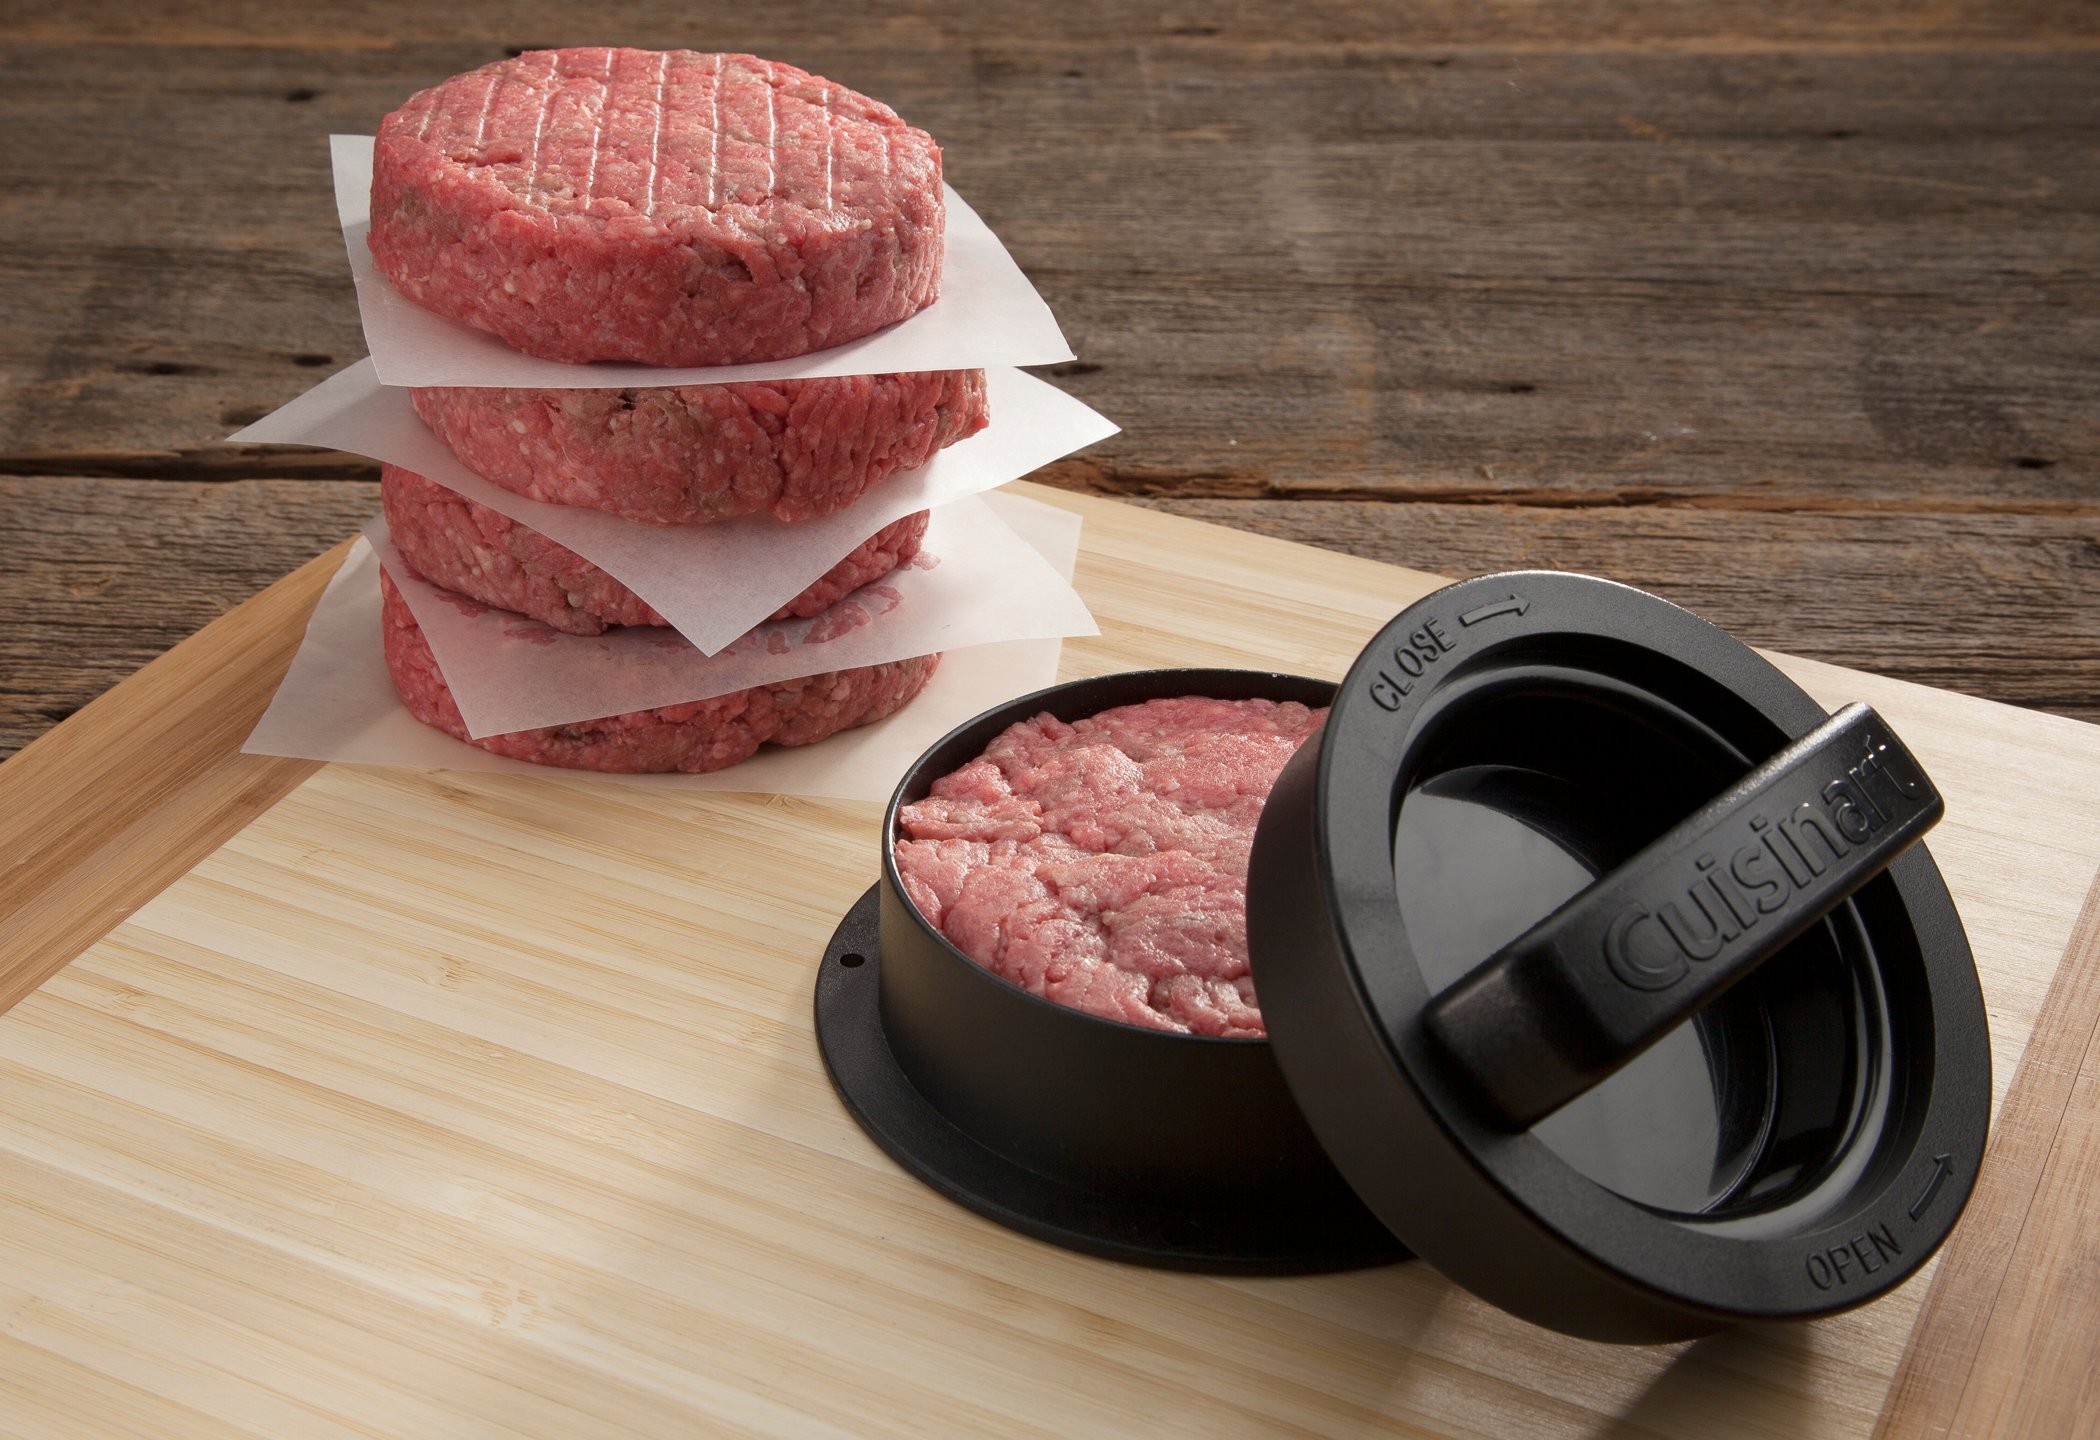 Cyclopen Lelie Of anders 3-In-1 Burger Press - Quality Grilling Tools and Accessories - Cuisinart.com